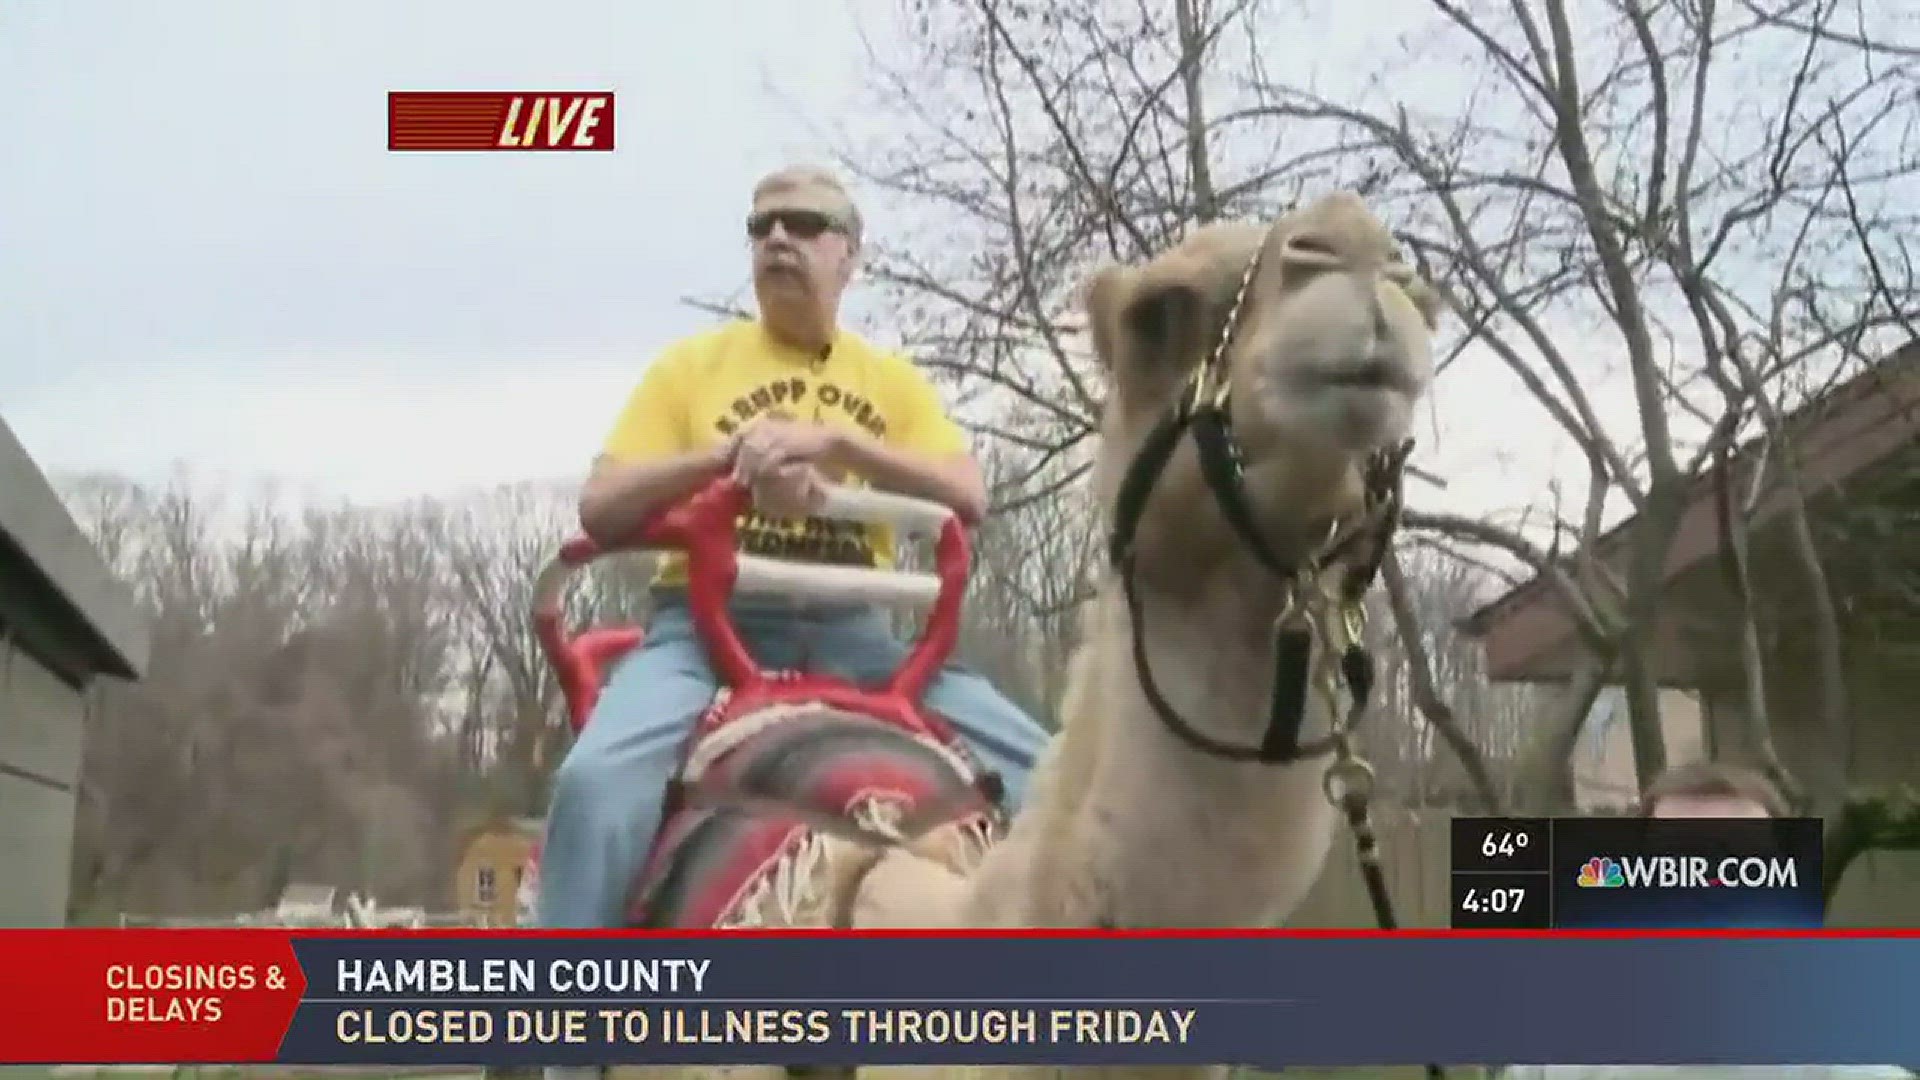 For years, Ed Rupp has been getting folks ready for the weekend with his Wednesday "Hump Day" routine on 10 News Today. Zoo Knoxville reunited Ed and Debbie, who he mentions Wednesday morning and they rode a camel together. Live at Five at 4-2-8-17 Live a